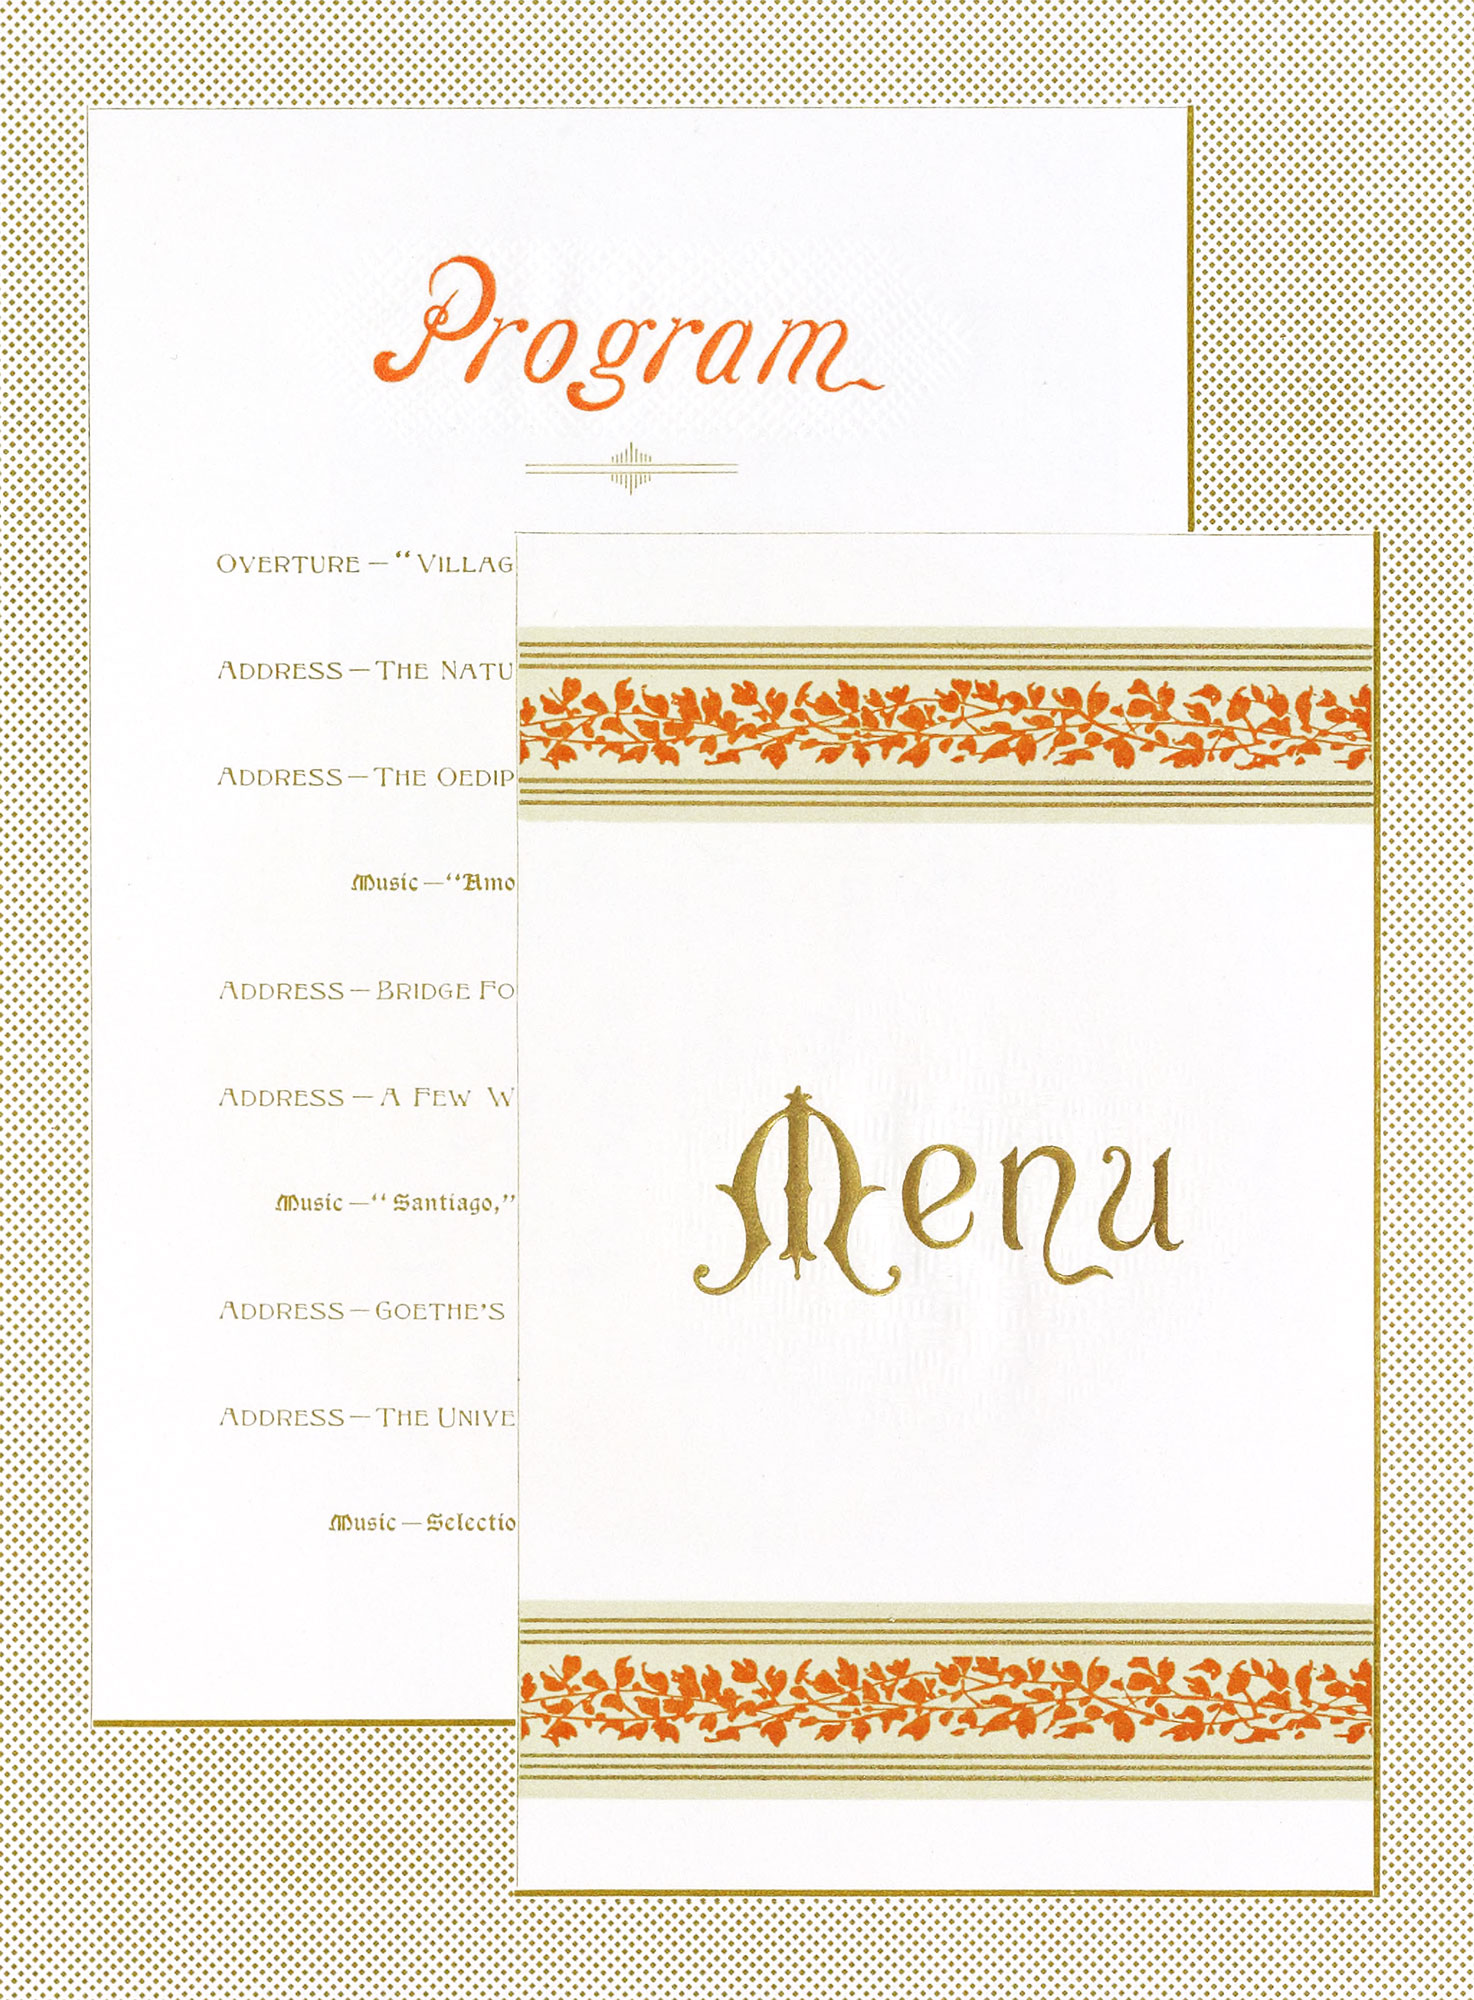 Sample printed menu with gold ink and embossing